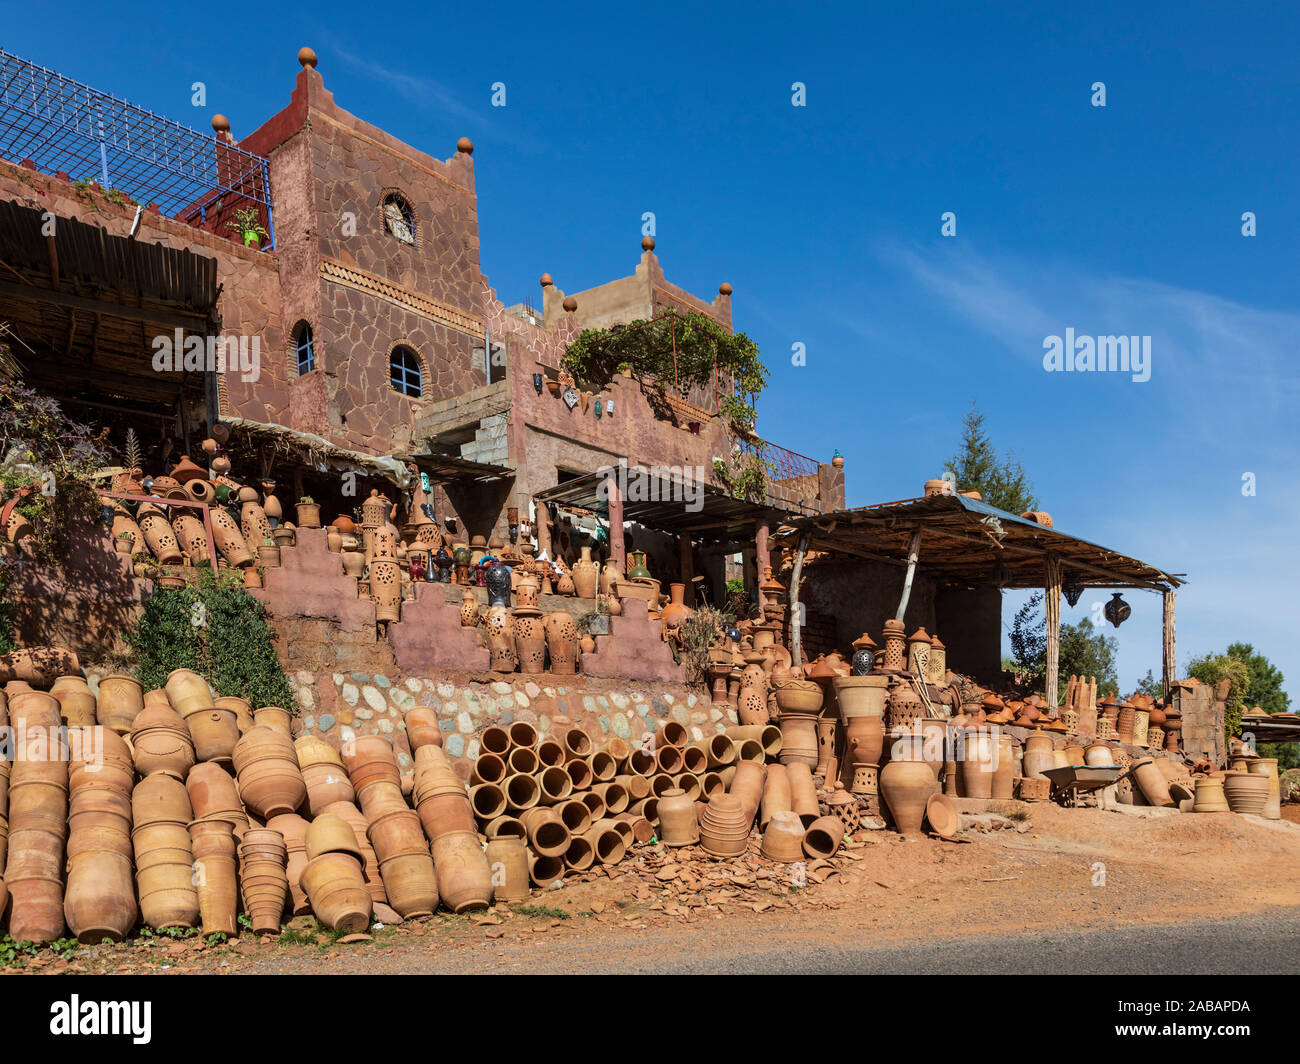 Pottery Ourika Valley High Atlas Near Marrakech Marocco Maghreb North Africa Stock Photo Alamy